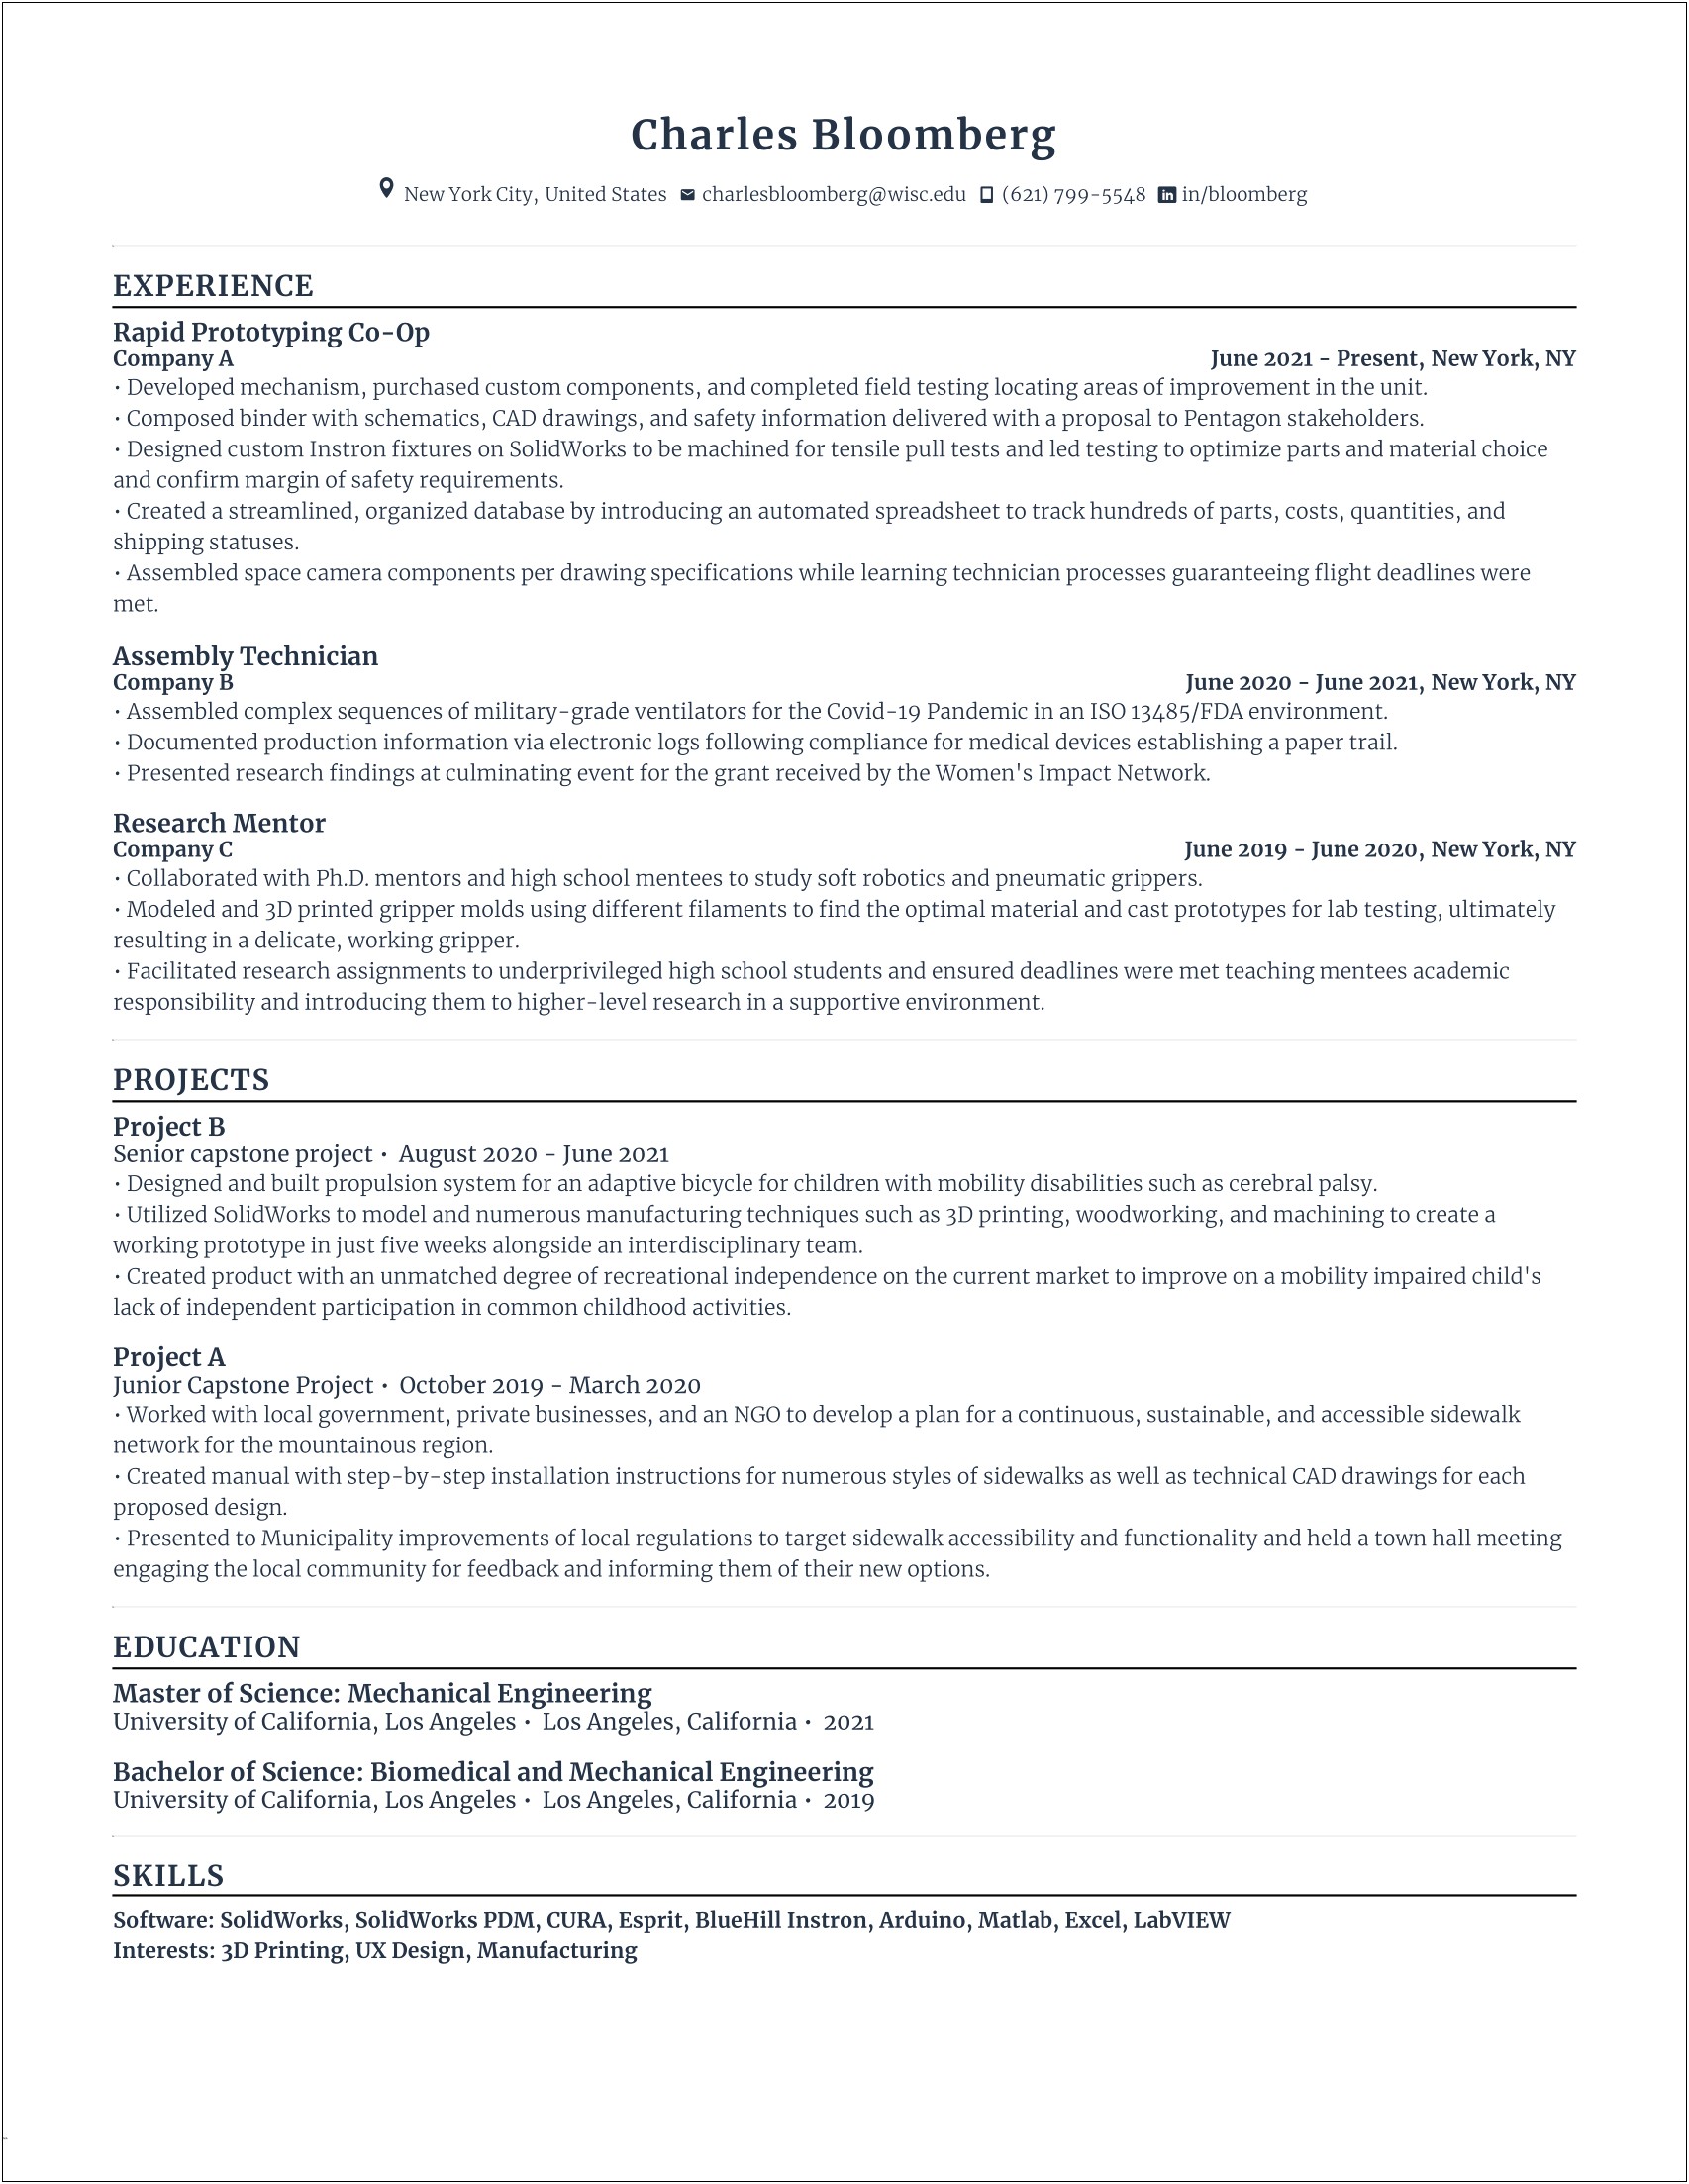 Type Skill For Autosuggestion For Resume